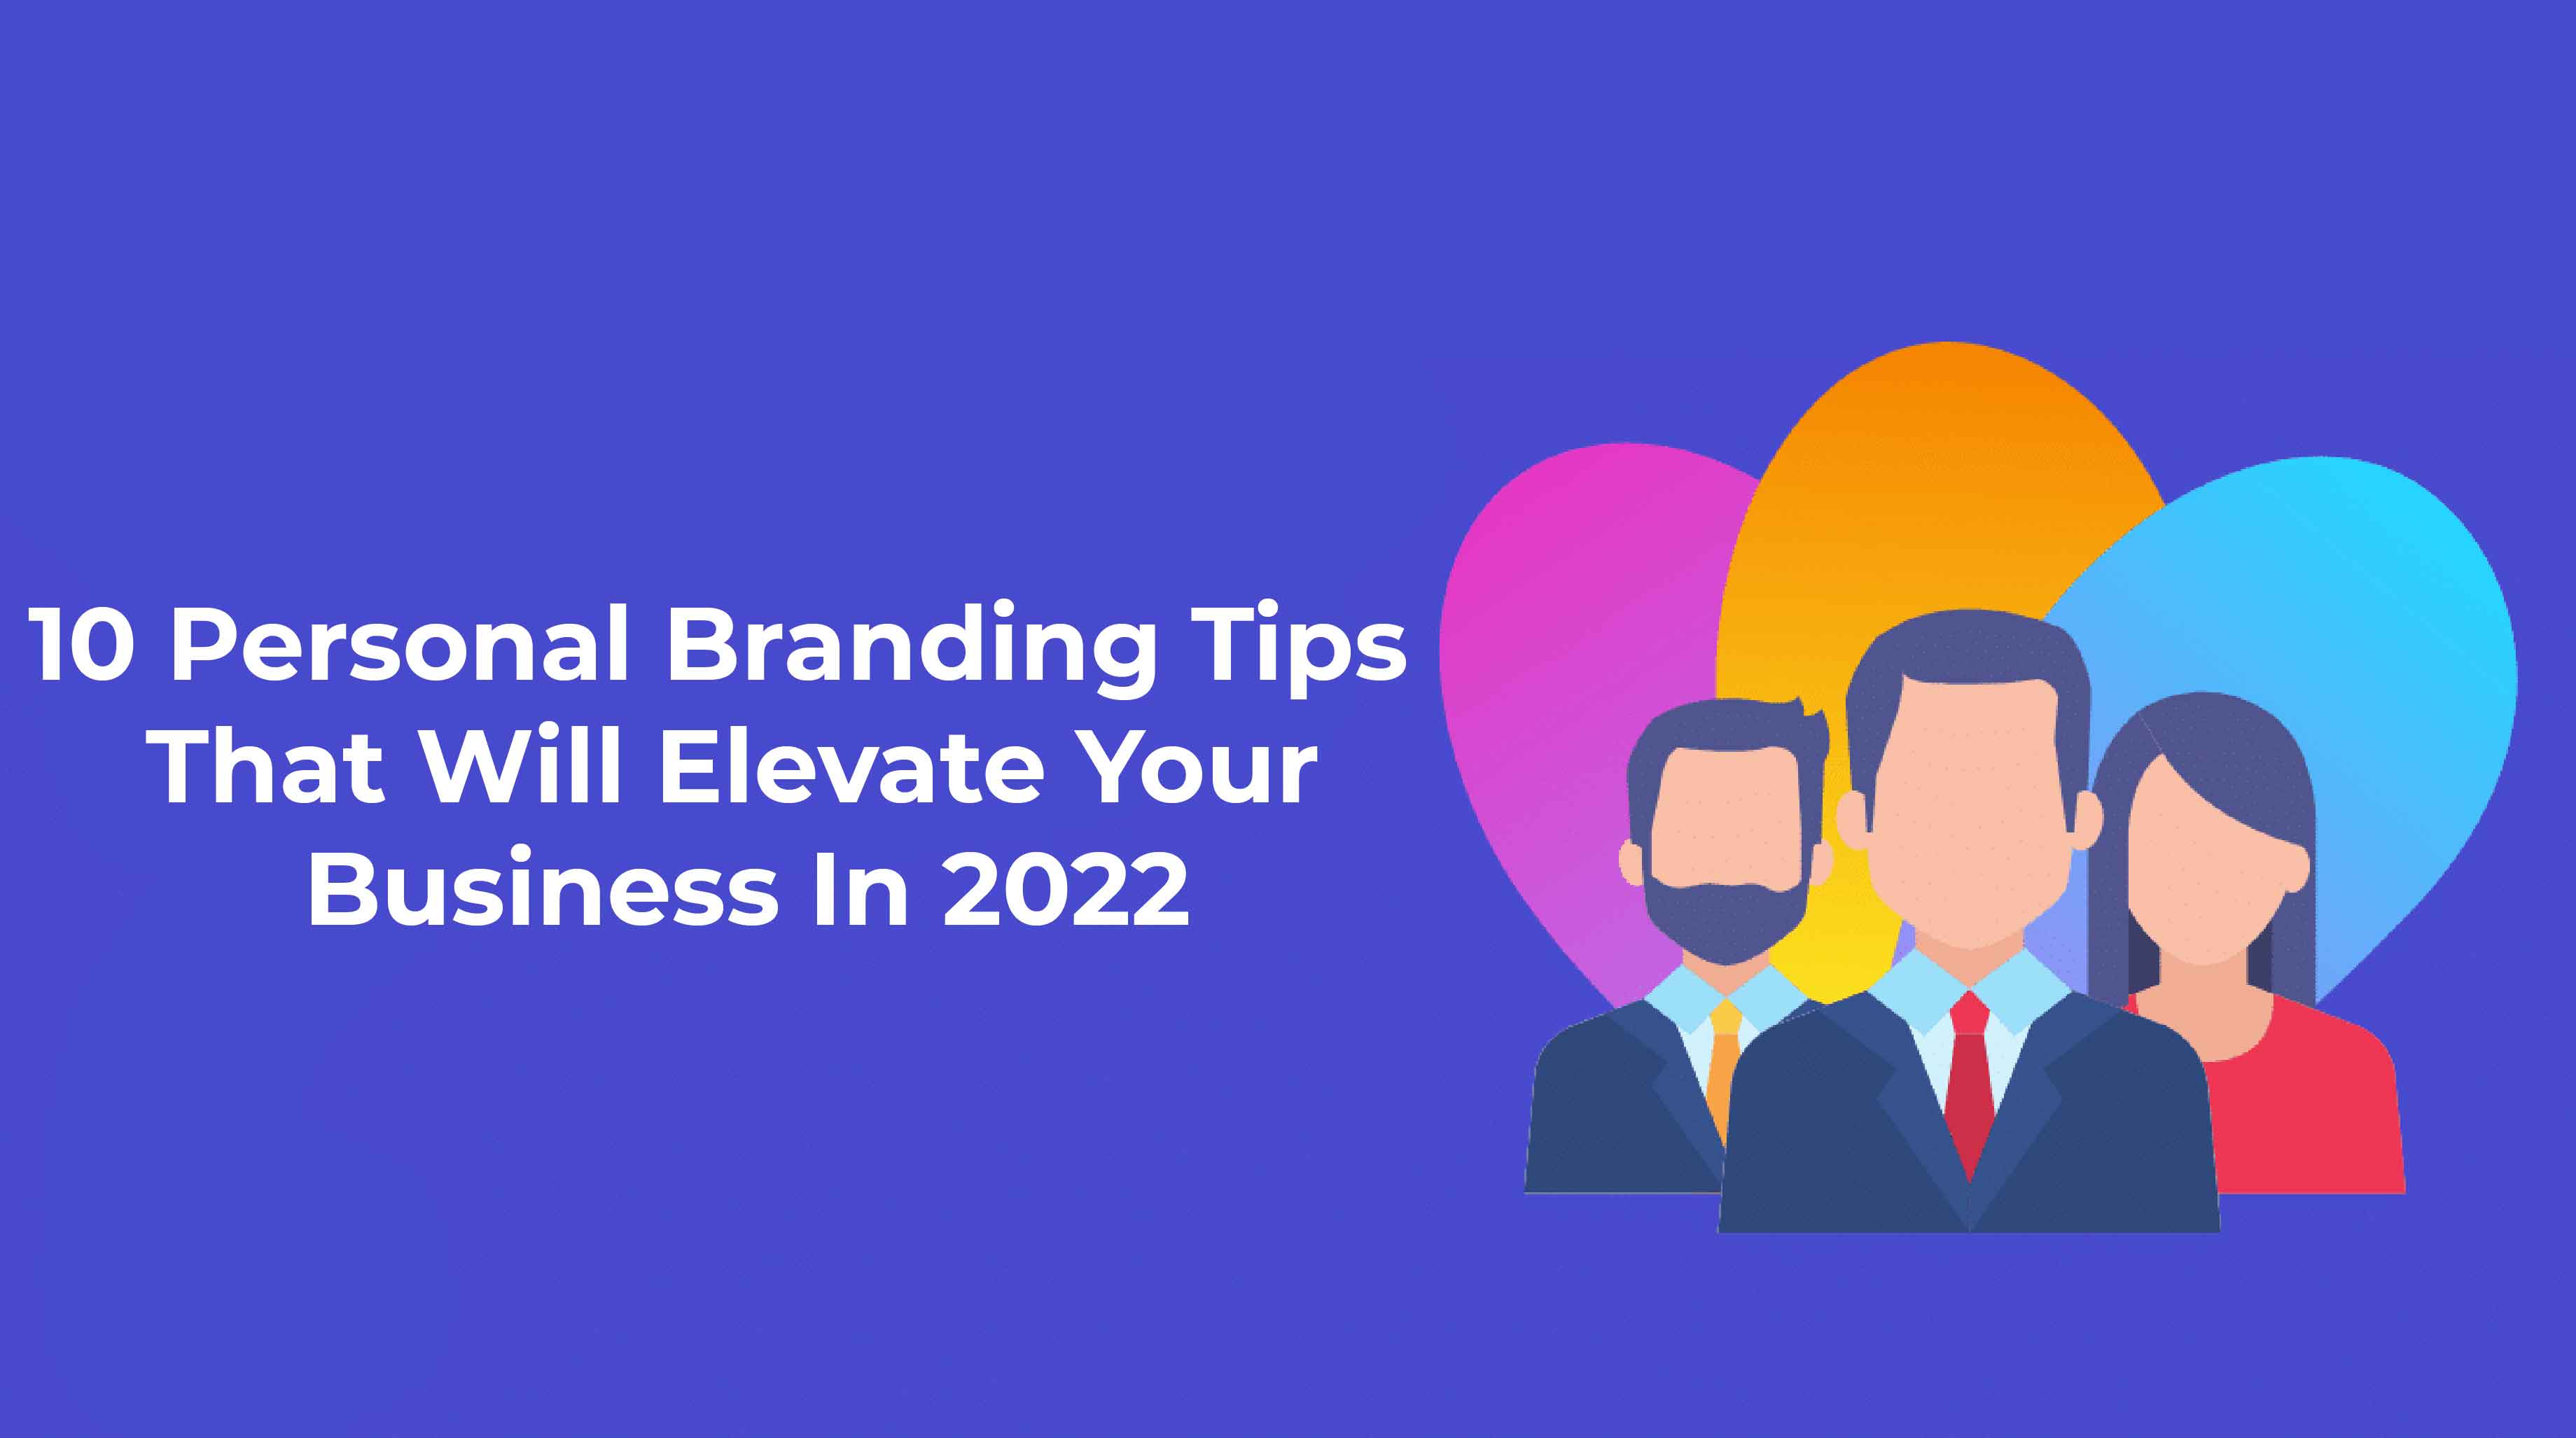 10 personal branding tips that will elevate your business in 2022